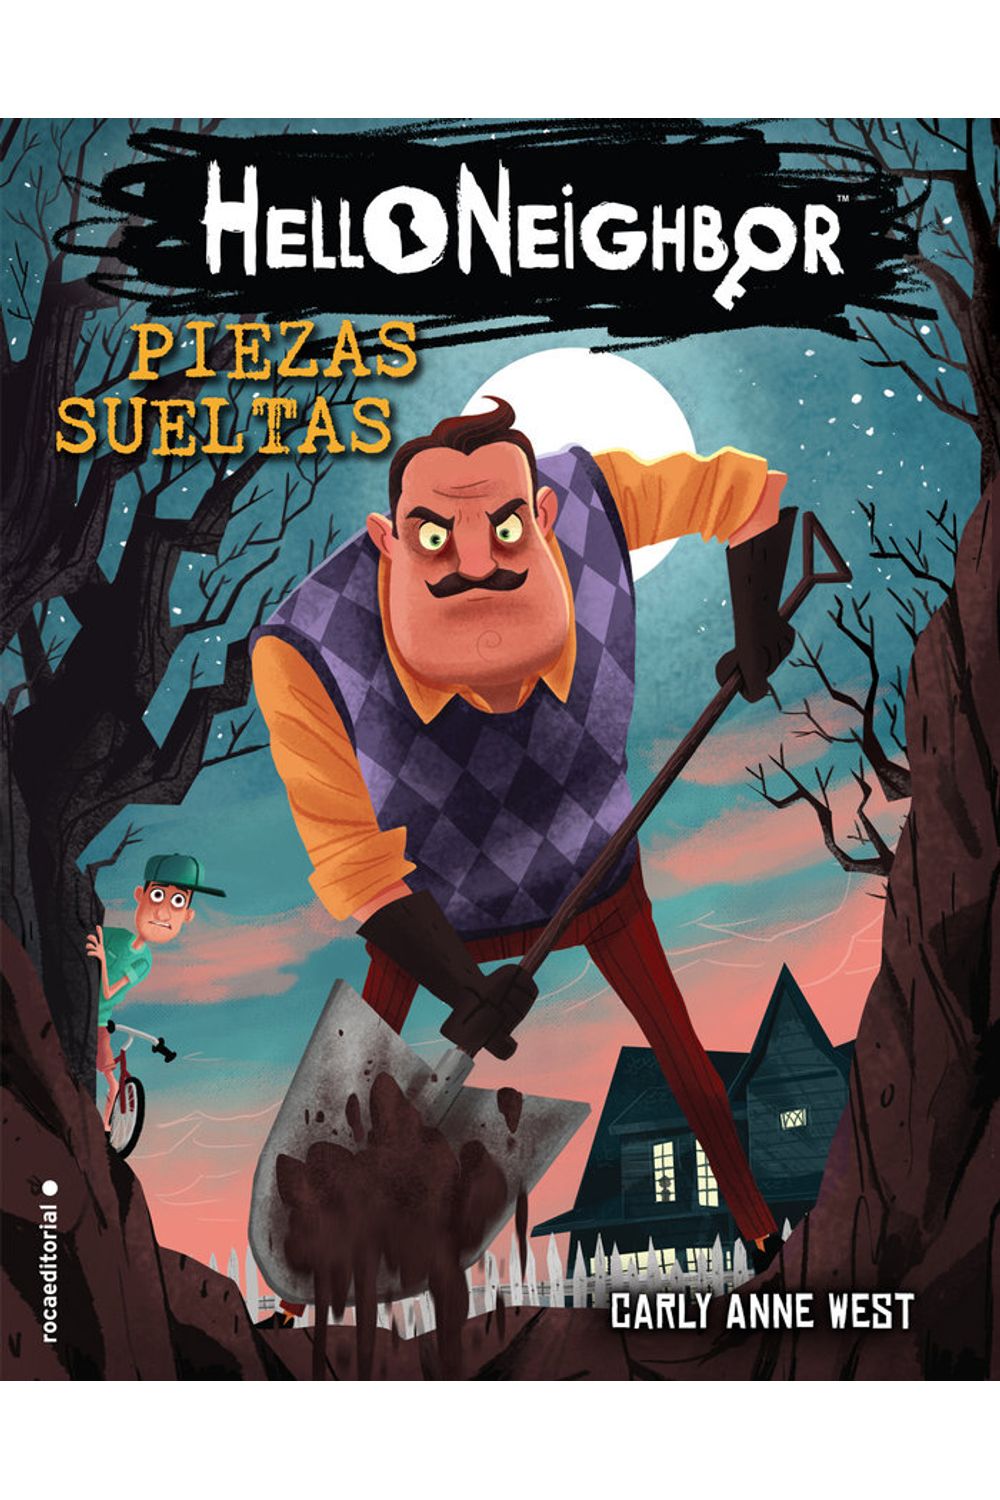 how to download hello neighbor on steam